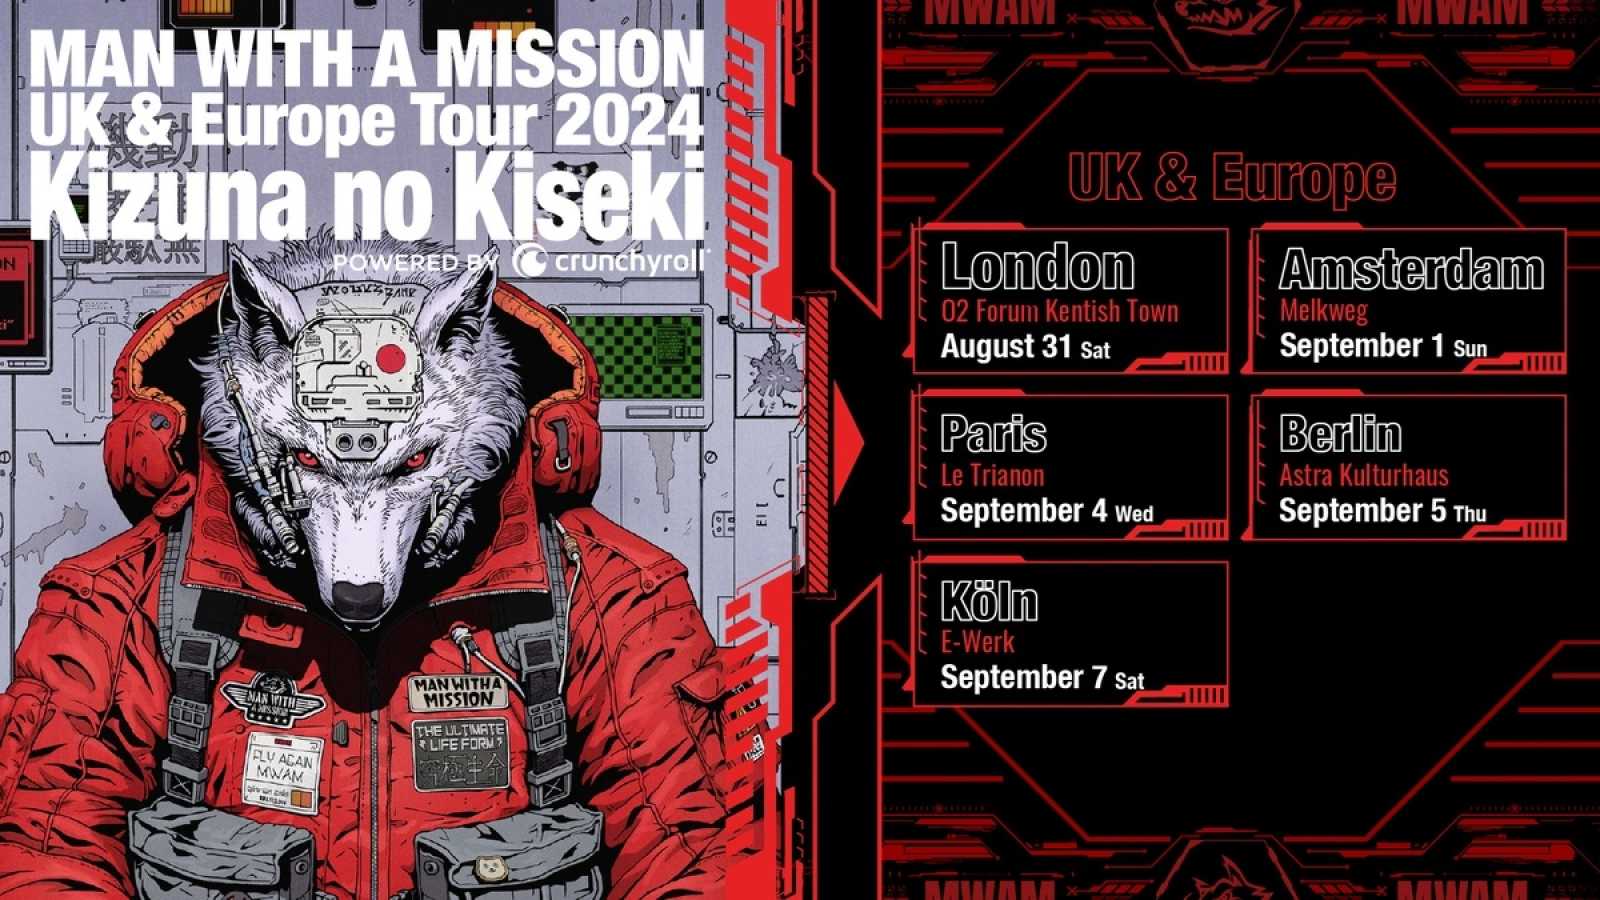 MAN WITH A MISSION Announce European Tour © MAN WITH A MISSION. All rights reserved.